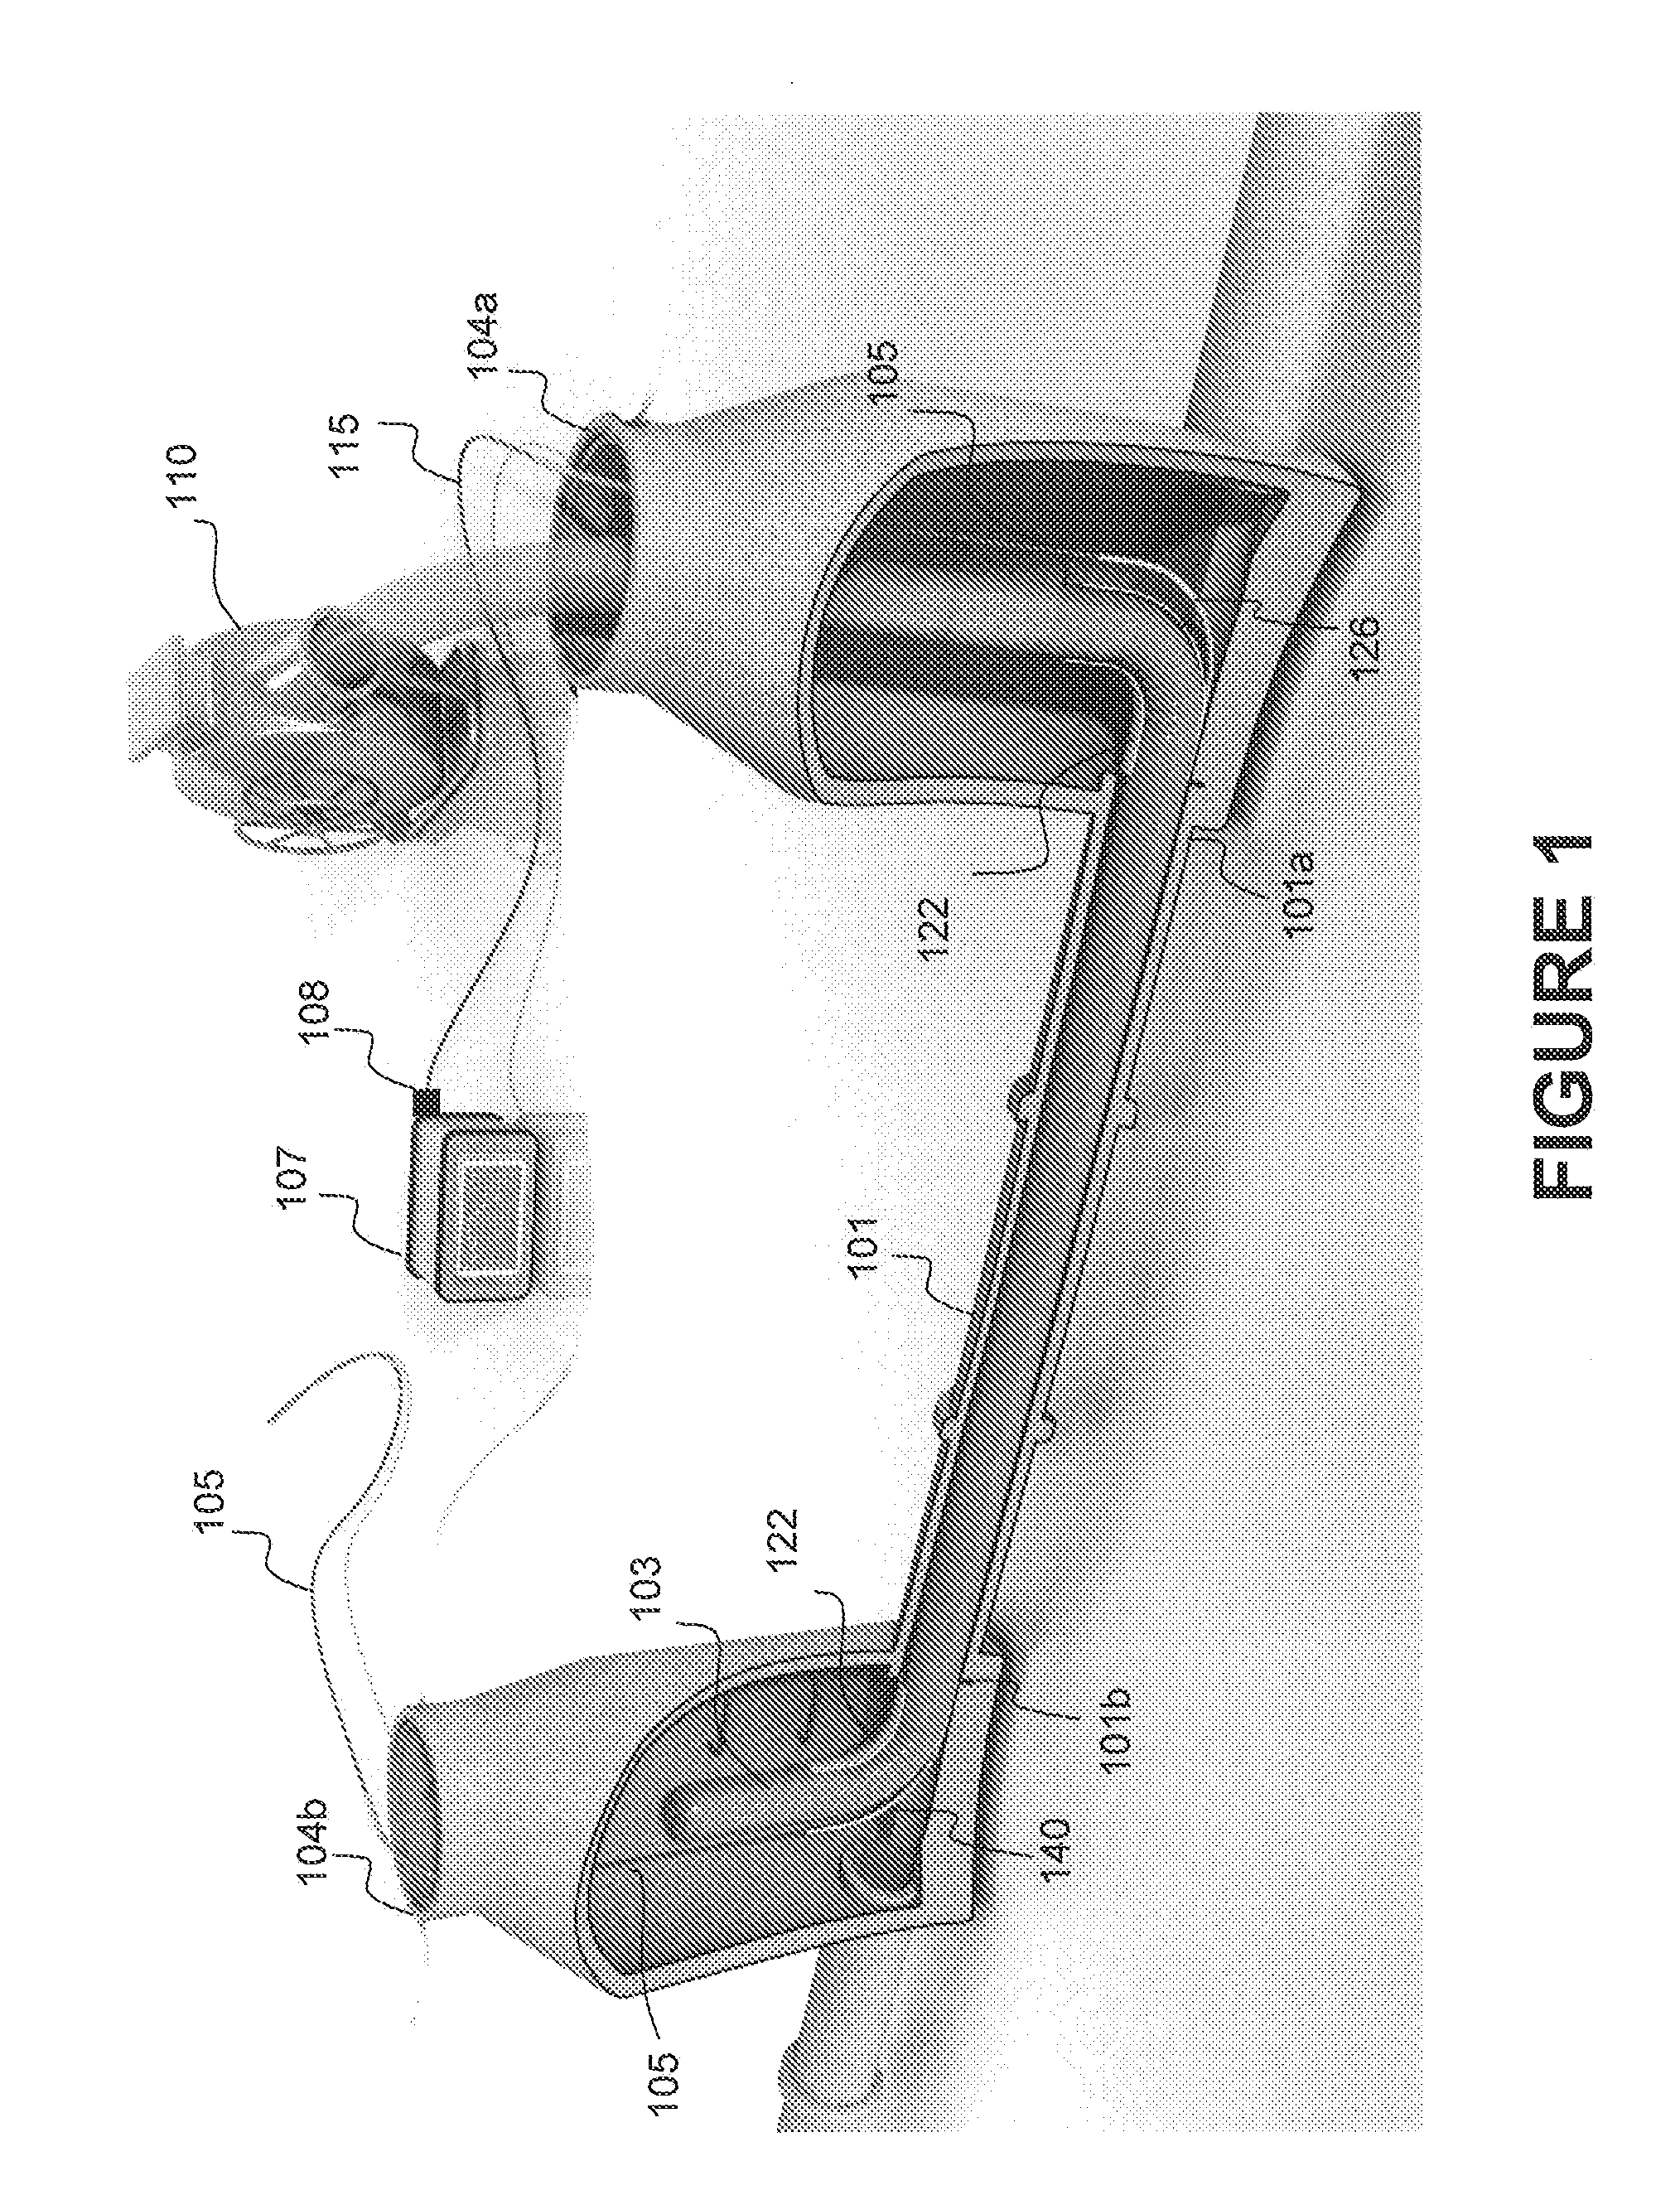 Method and apparatus for determining proper curing of pipe liners using distributed temperature sensing